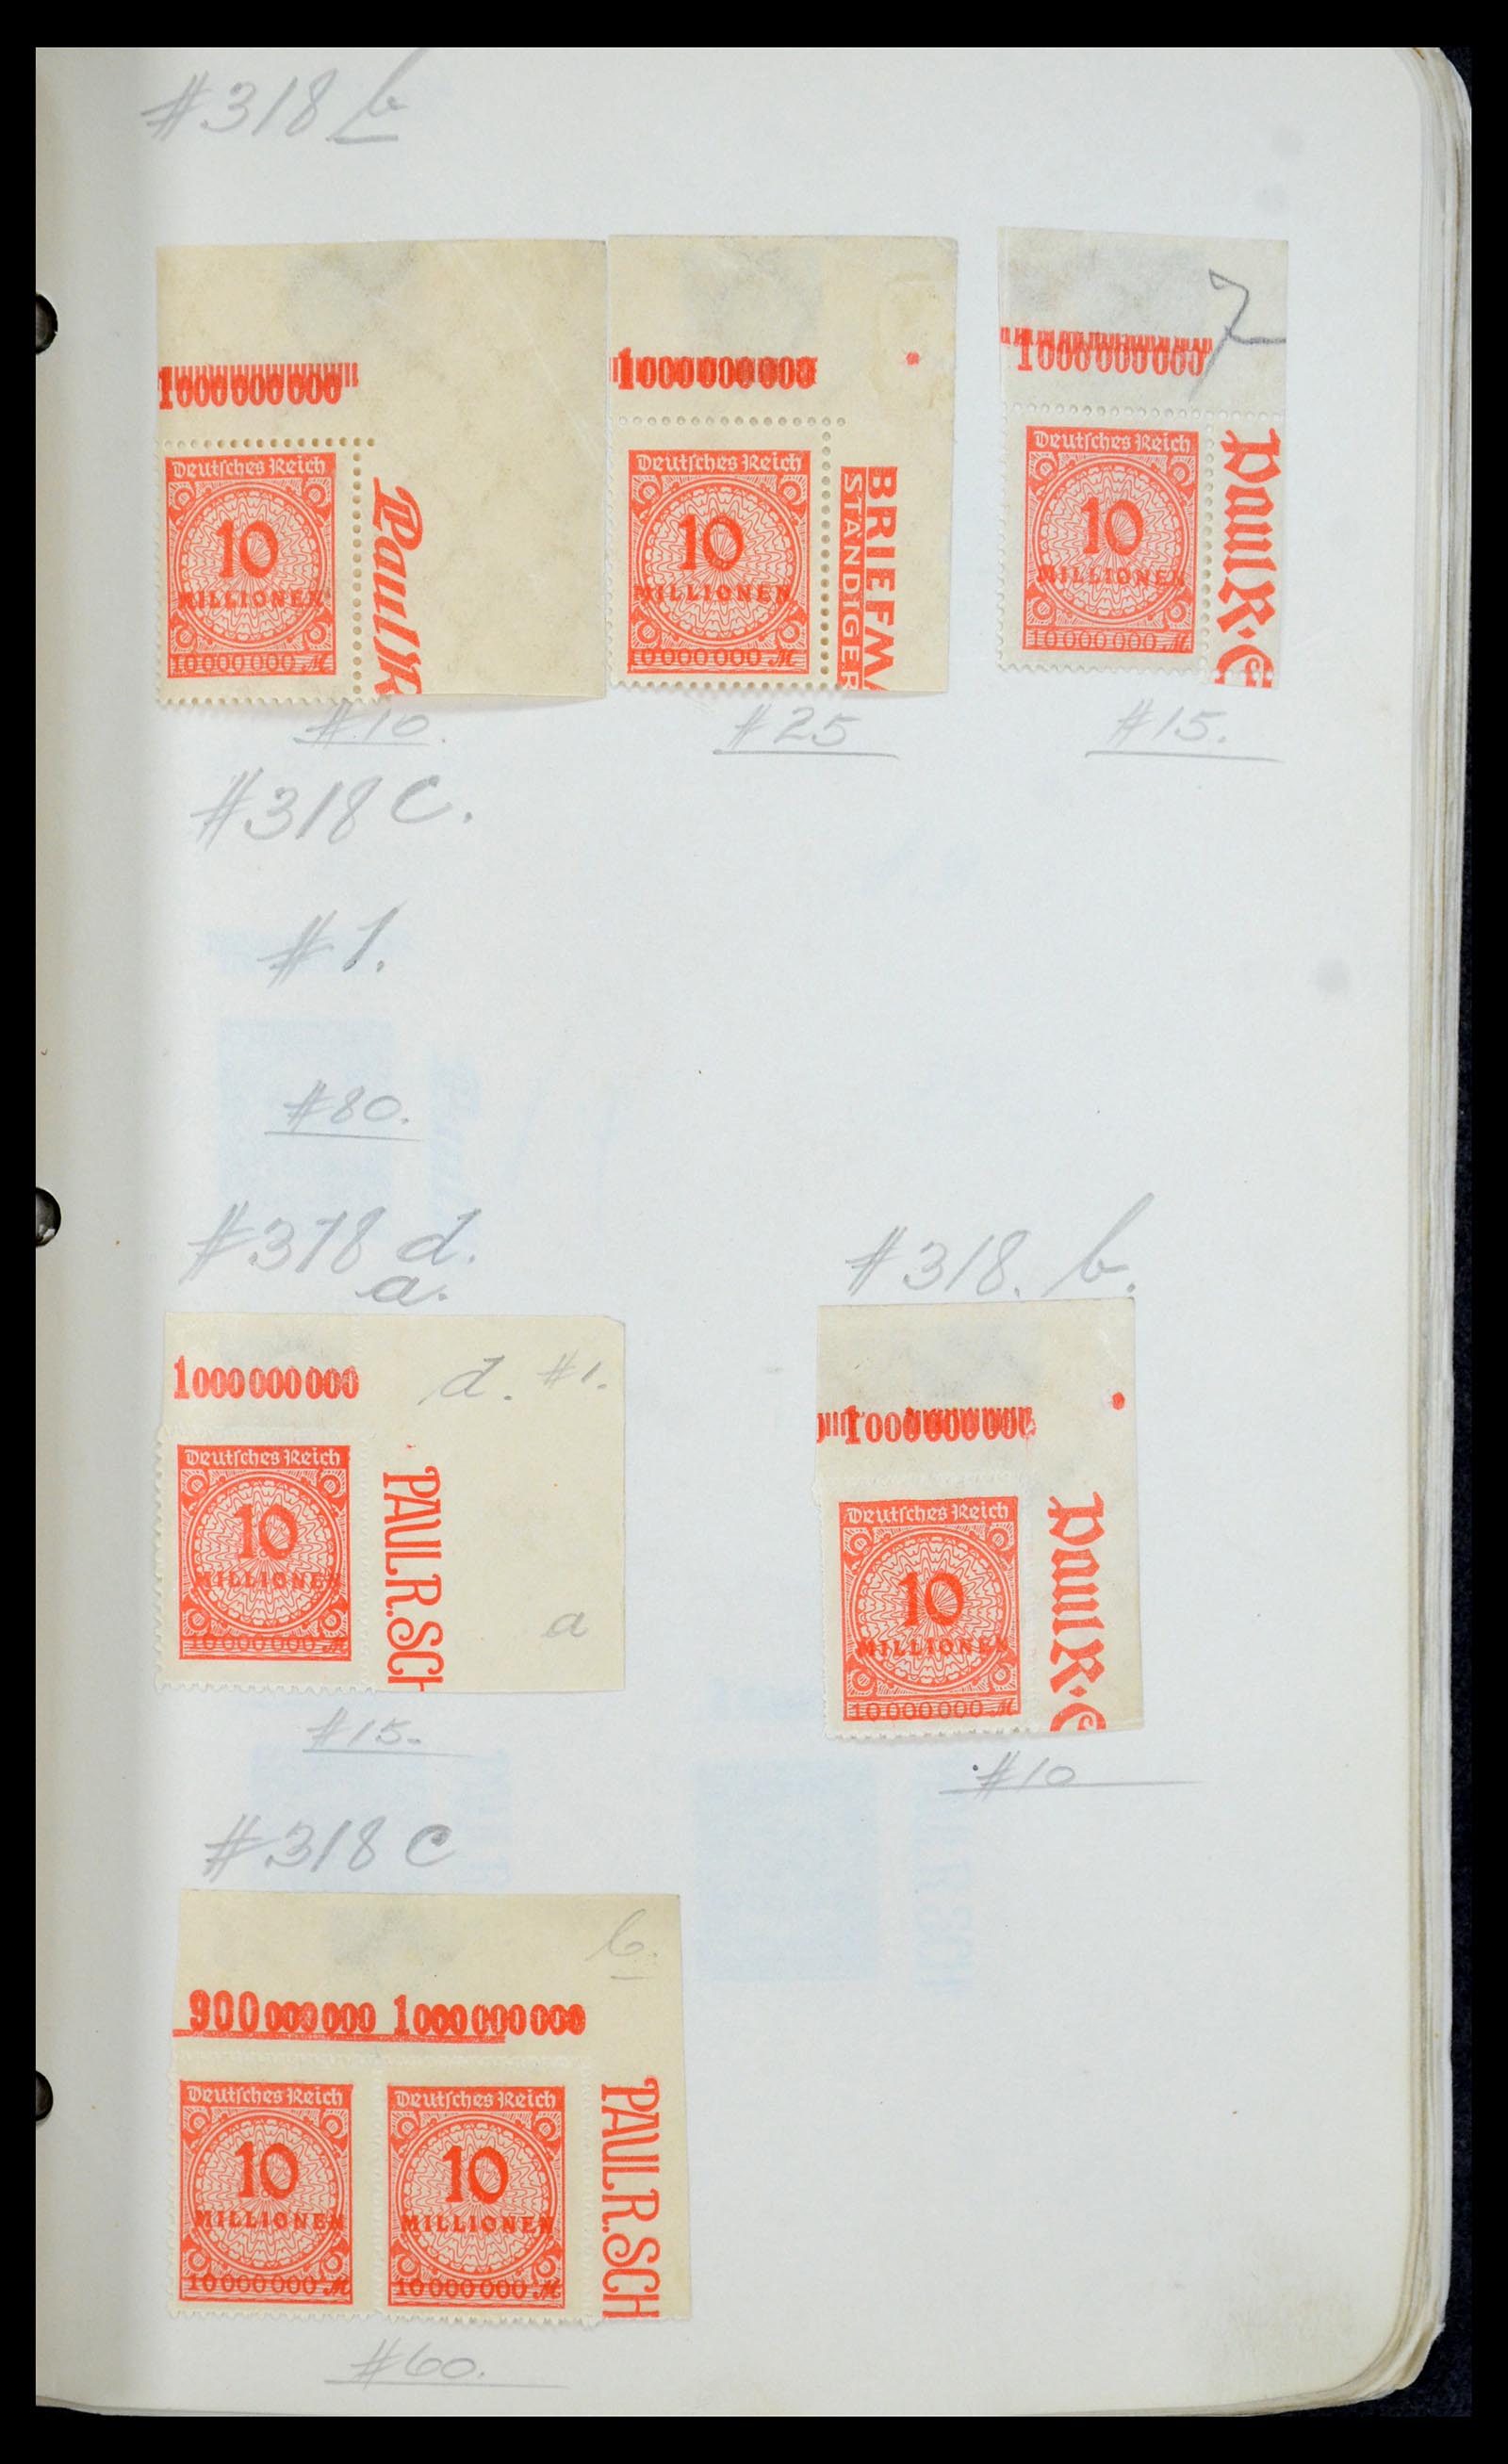 35565 027 - Stamp Collection 35565 German Reich infla 1919-1923.